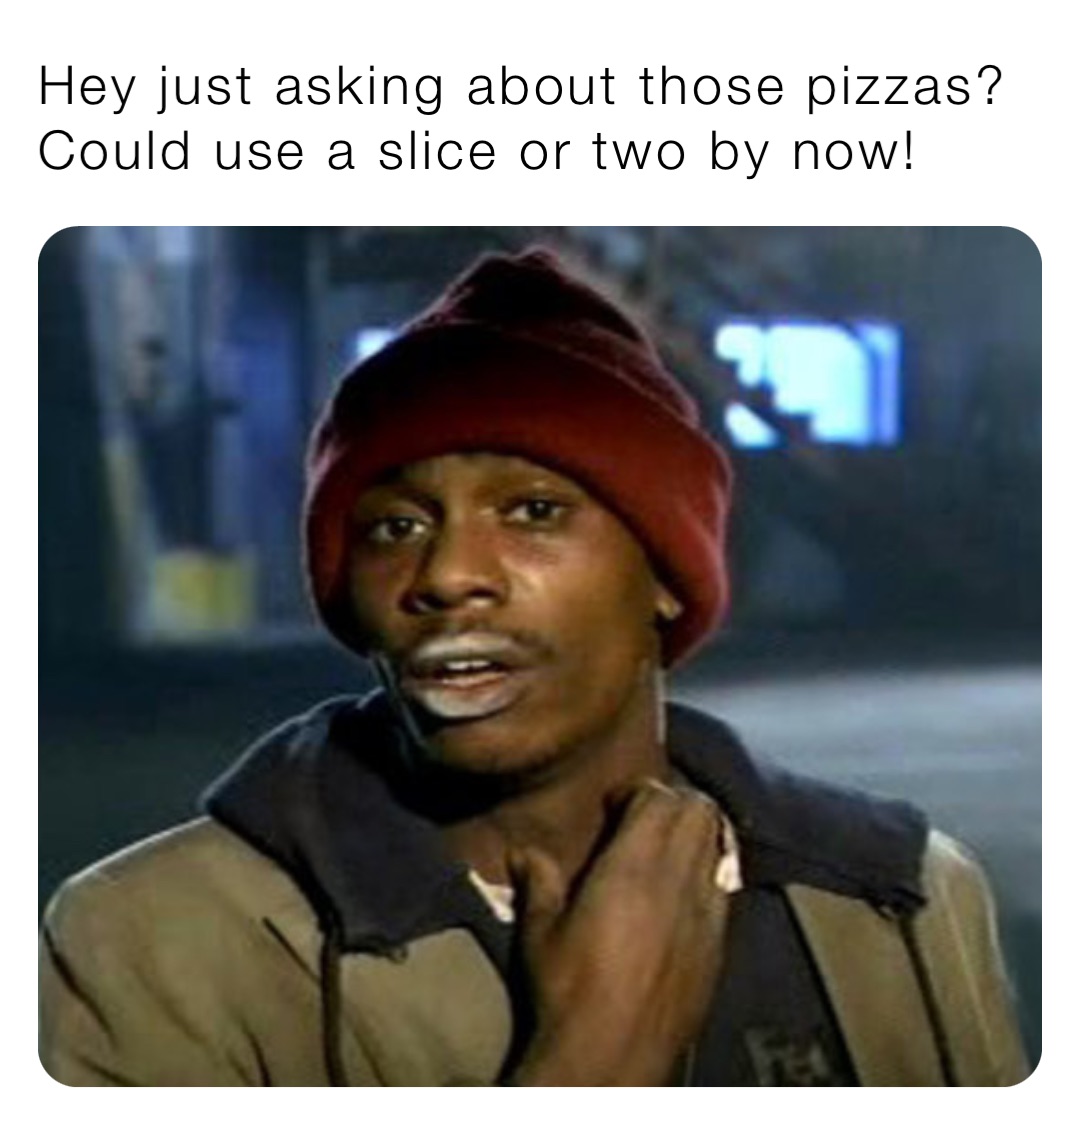 Hey just asking about those pizzas? 
Could use a slice or two by now!